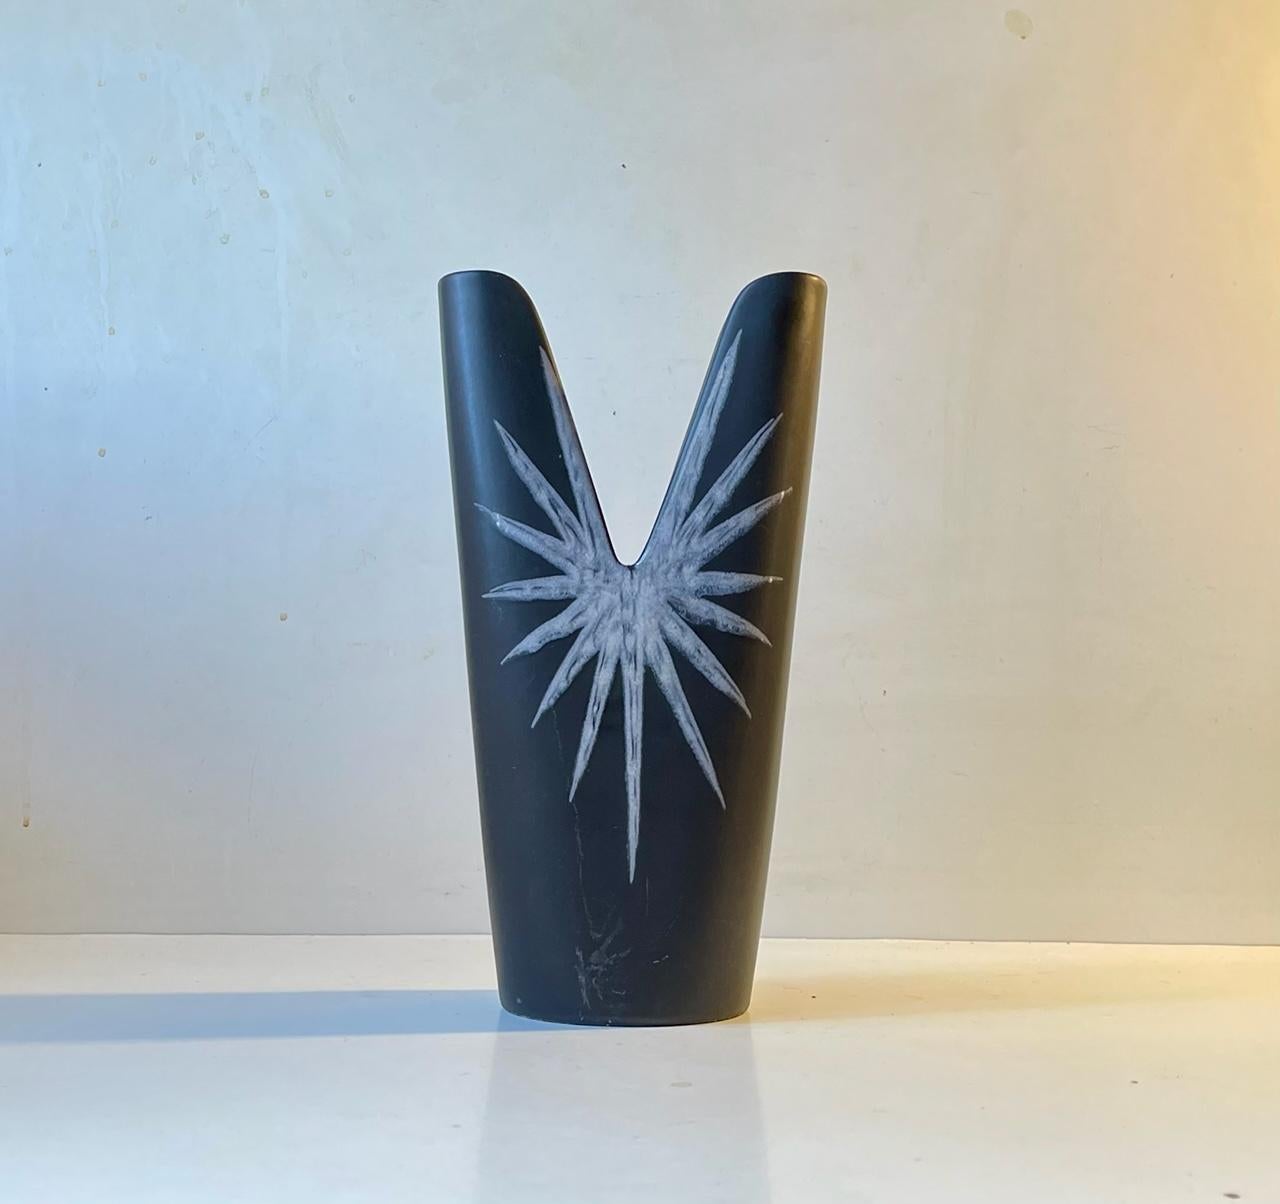 - Large burgundia vase designed by Svend Aage Holm-Sorensen 
- Black main glaze with white star decor by Svend Aage Jensen 
- Manufactured by Søholm in Denmark from 1956
- Fully Signed and numbered to the base. 
- Measurements: Height: 27.5,